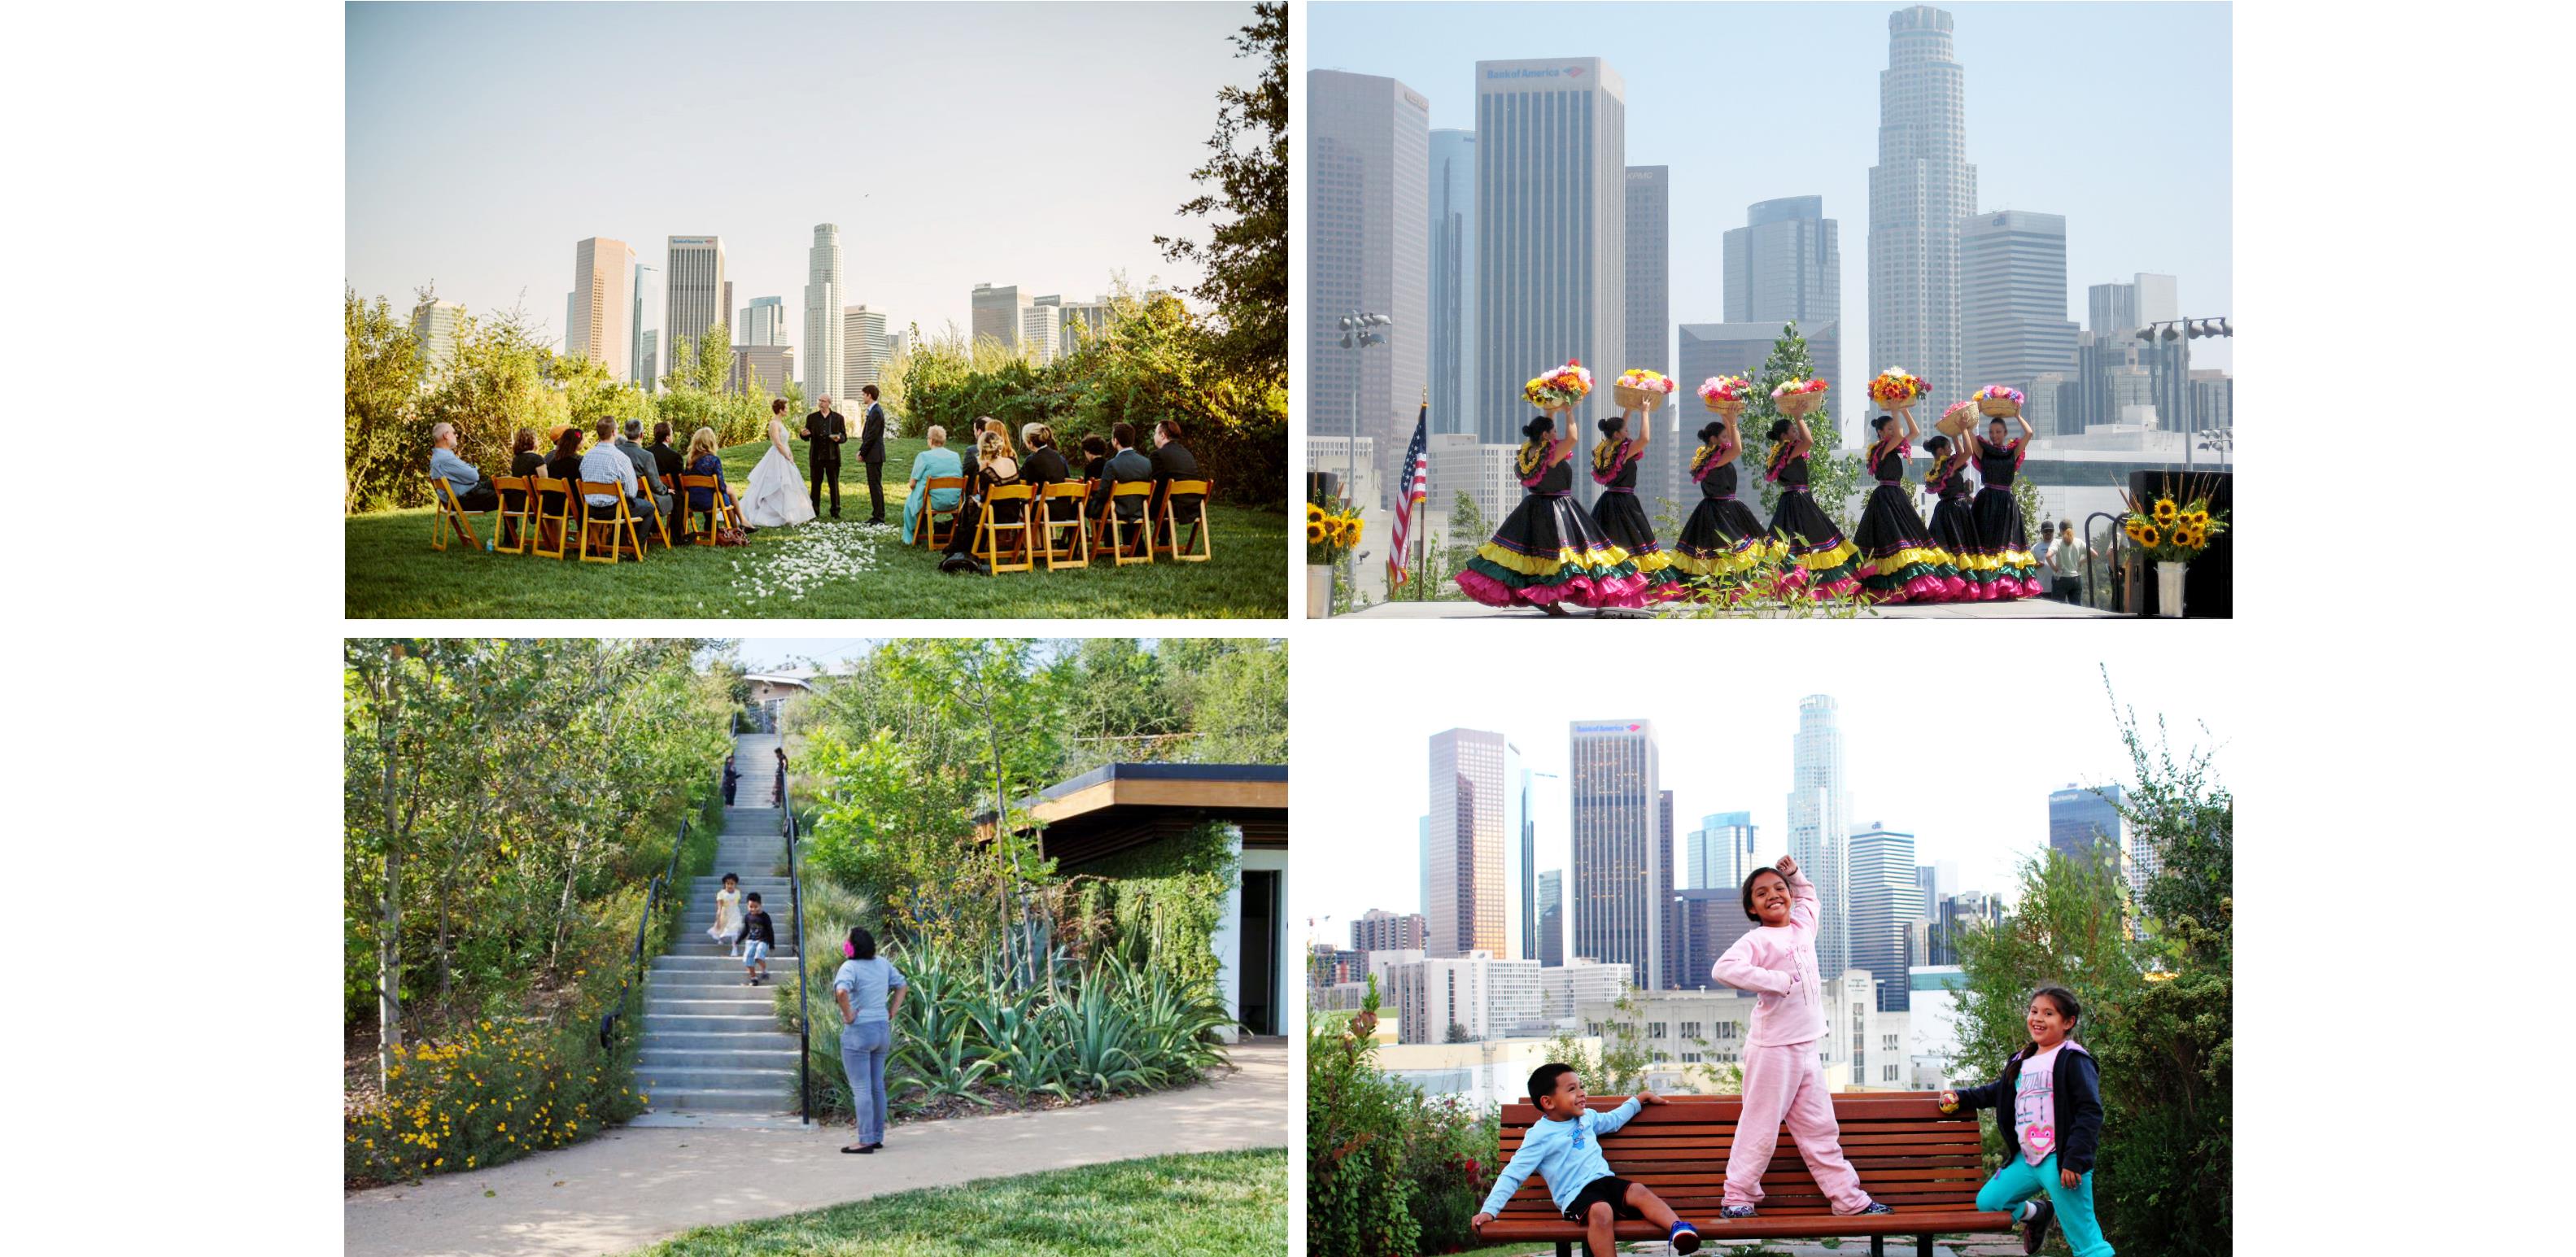 A Park for LA. Vista Hermosa sparks the imagination of the greater Los Angeles community.